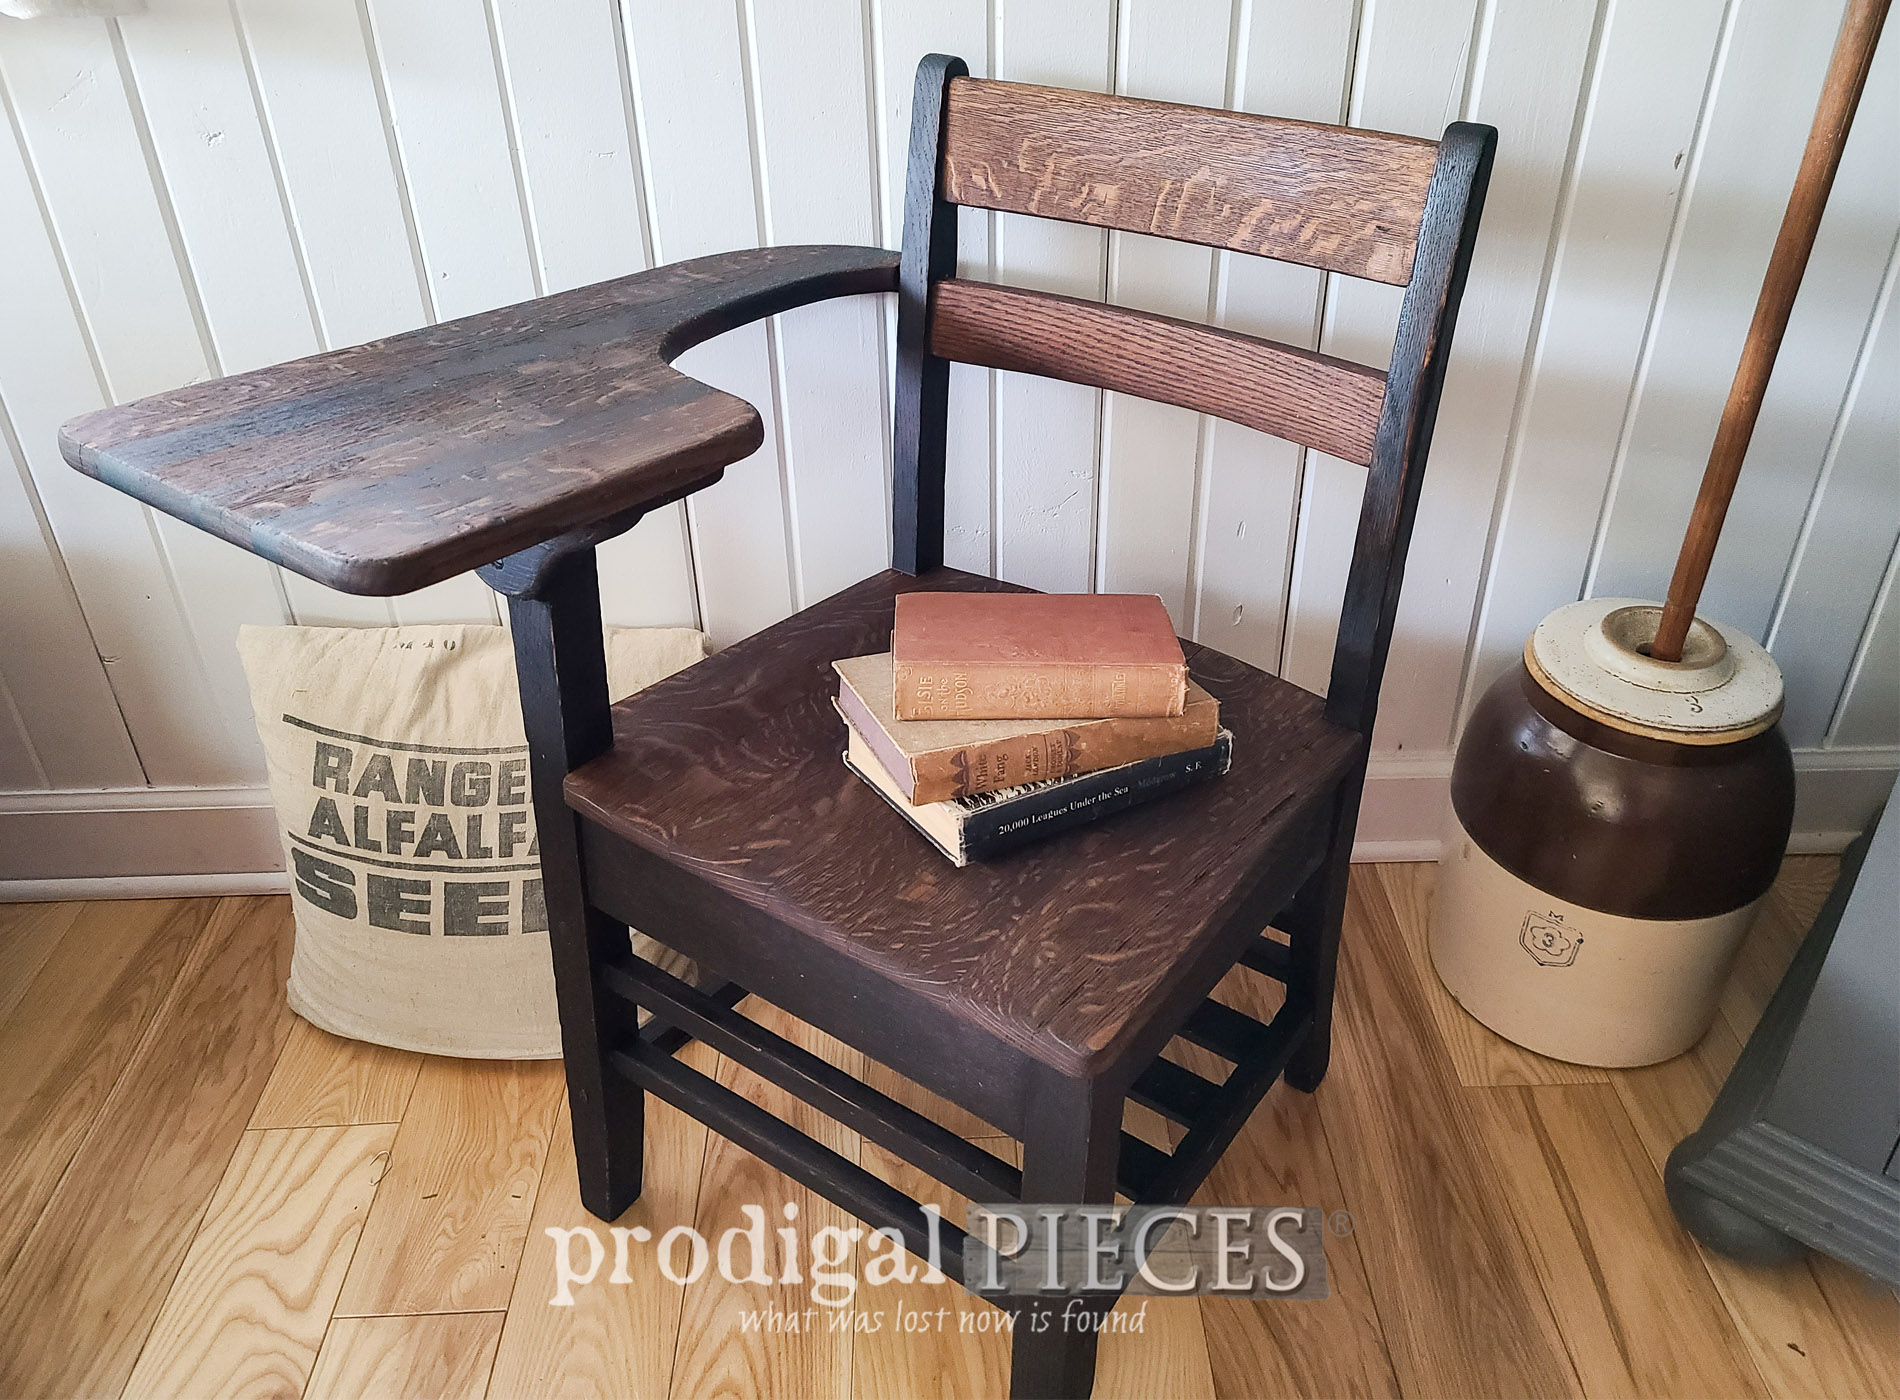 Featured Vintage School Desk Refresh with Paint & Stain by Larissa of Prodigal Pieces | prodigalpieces.com #prodigalpieces #furniture #diy #farmhouse